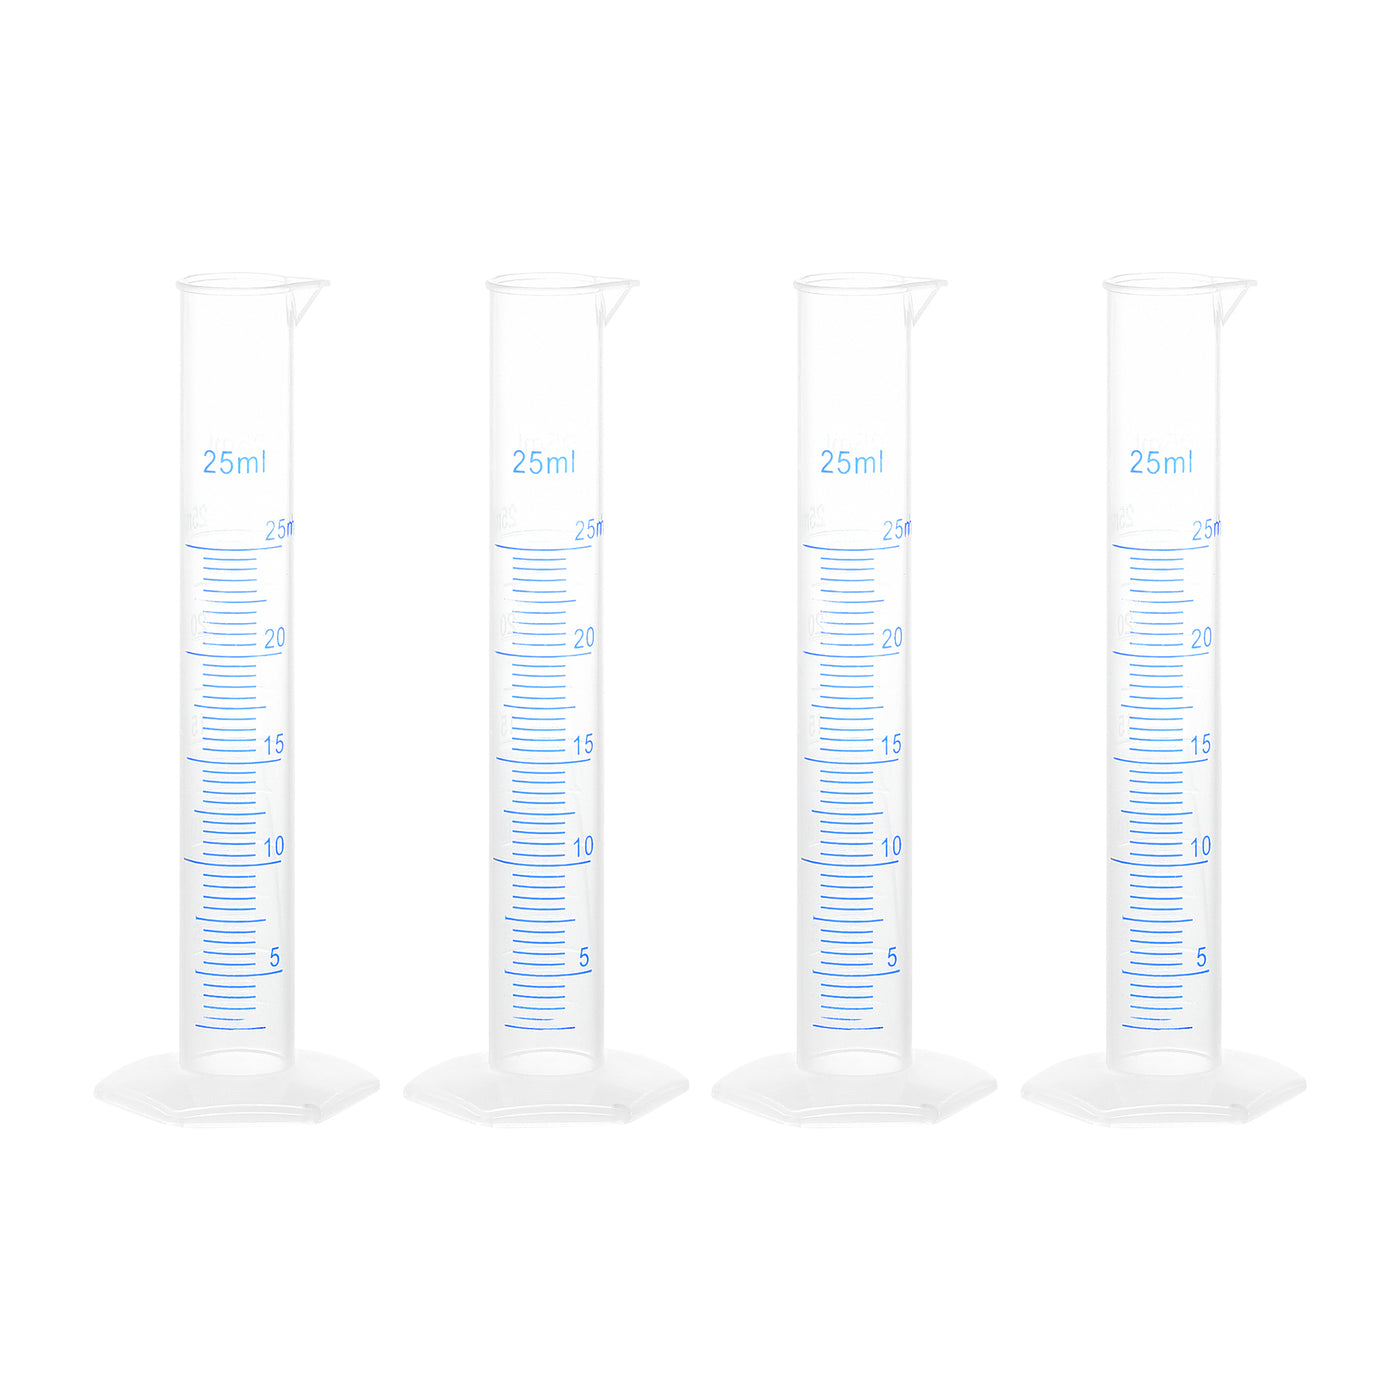 uxcell Uxcell Plastic Graduated Cylinder, 25ml Measuring Cylinder, 2-Sided Metric Marking 4Pcs